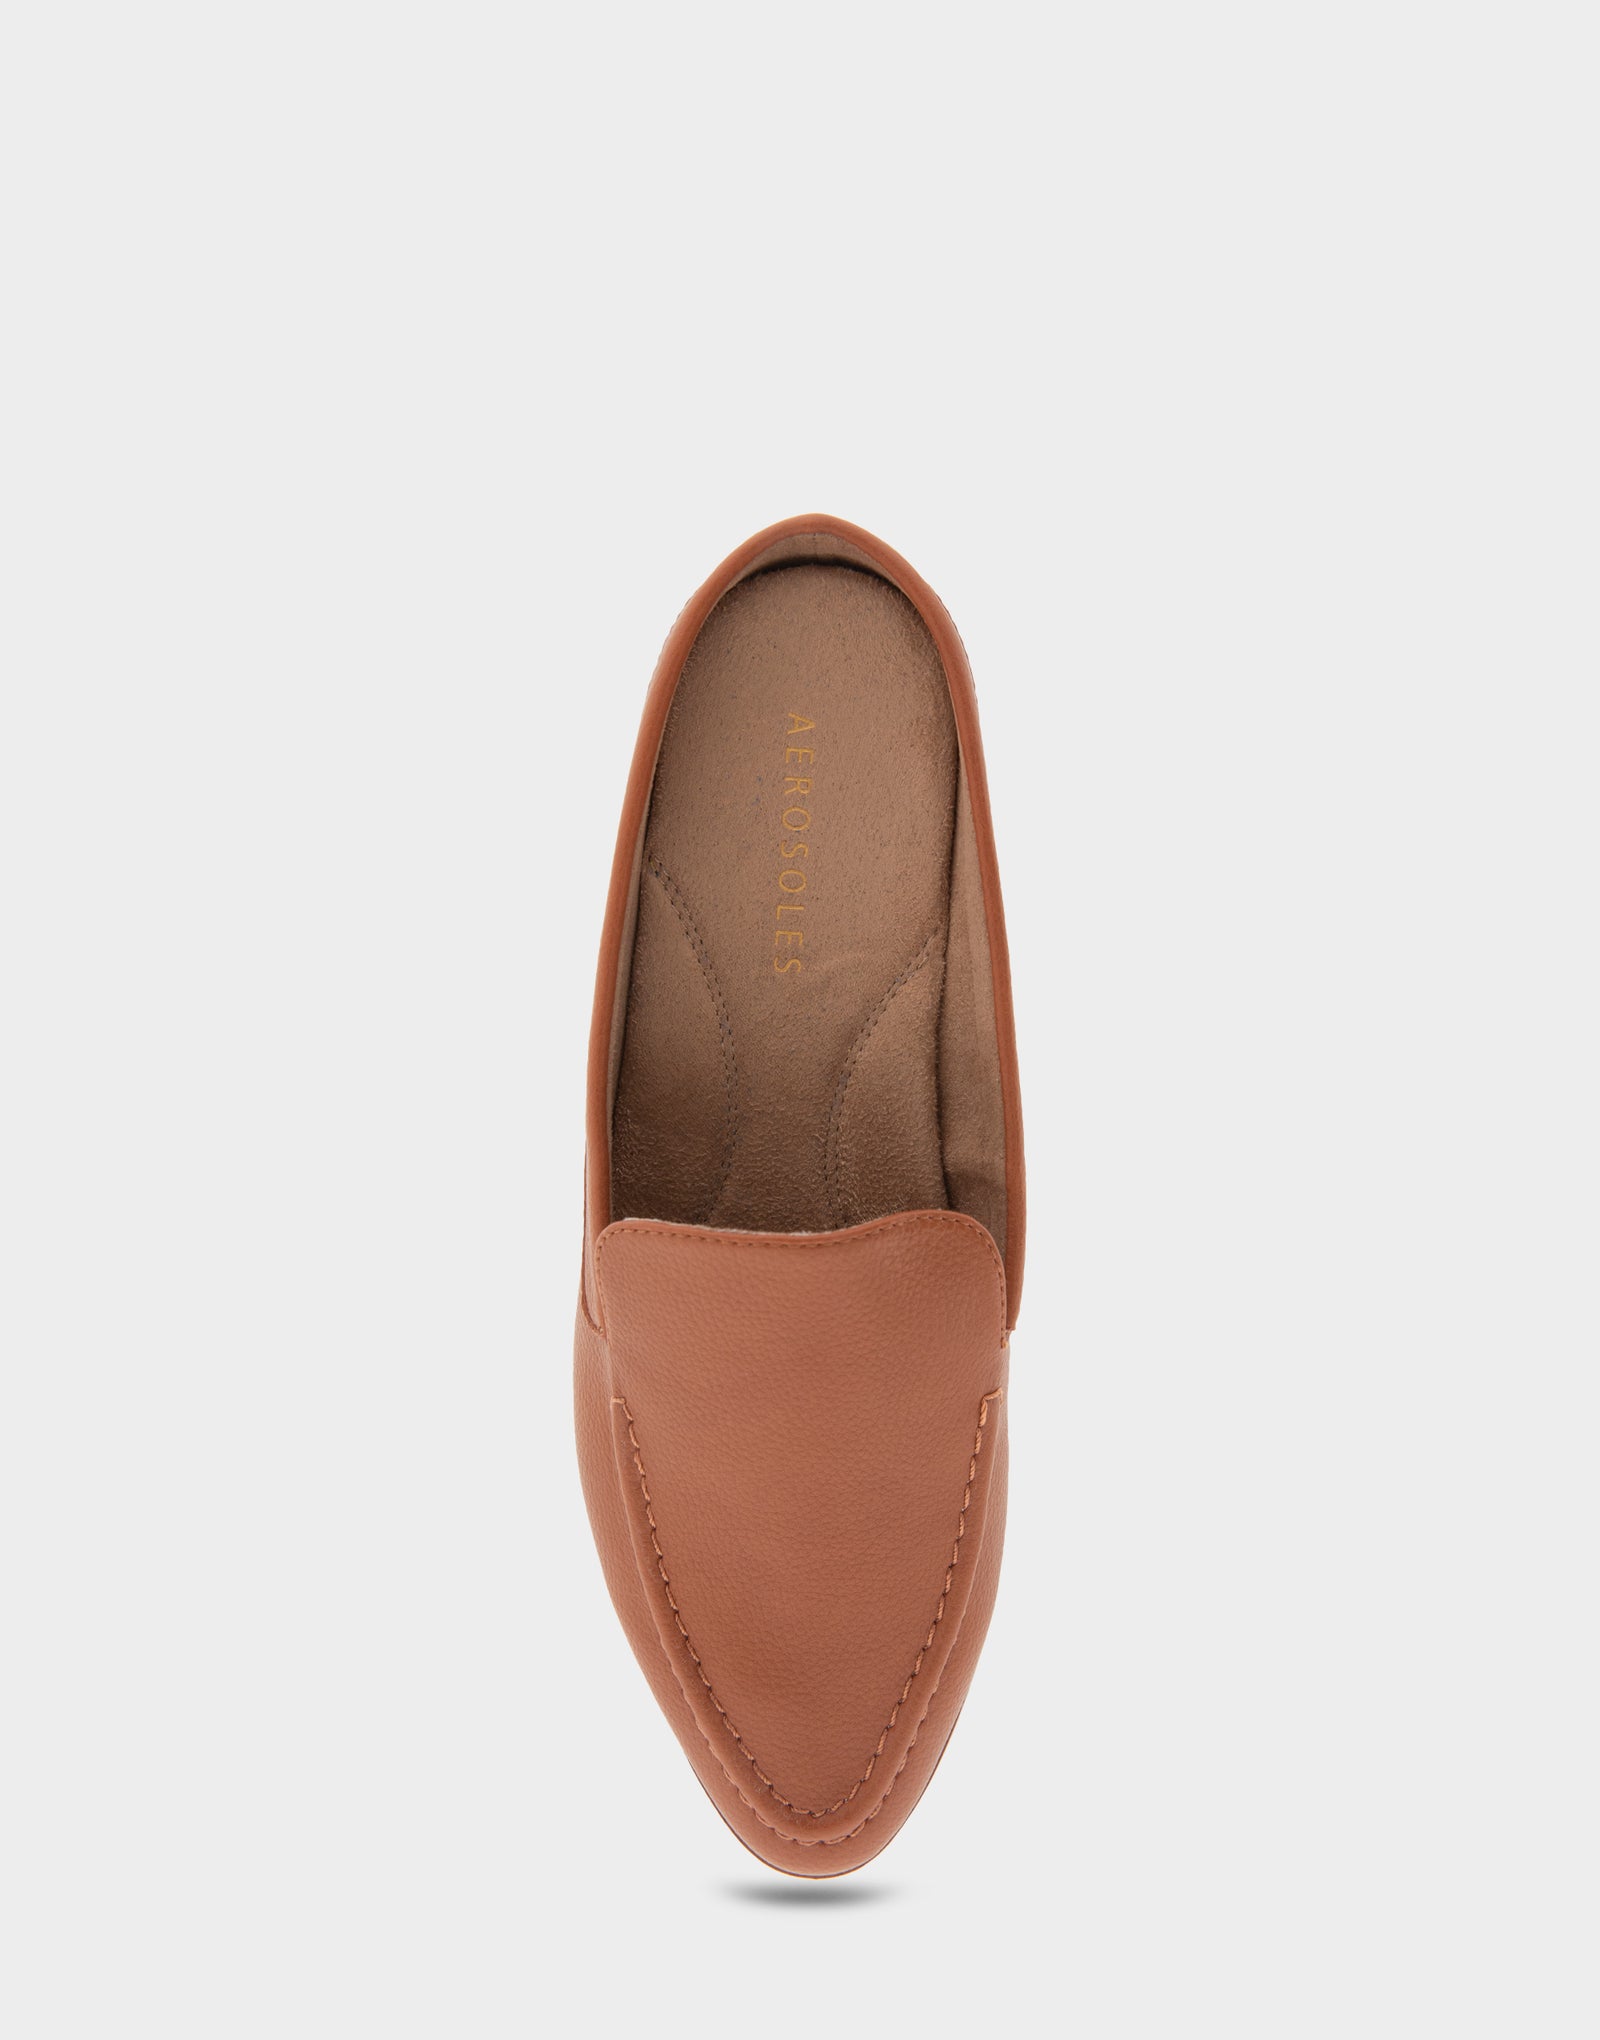 Women's Backless Slip On Loafer in Tan Faux Leather